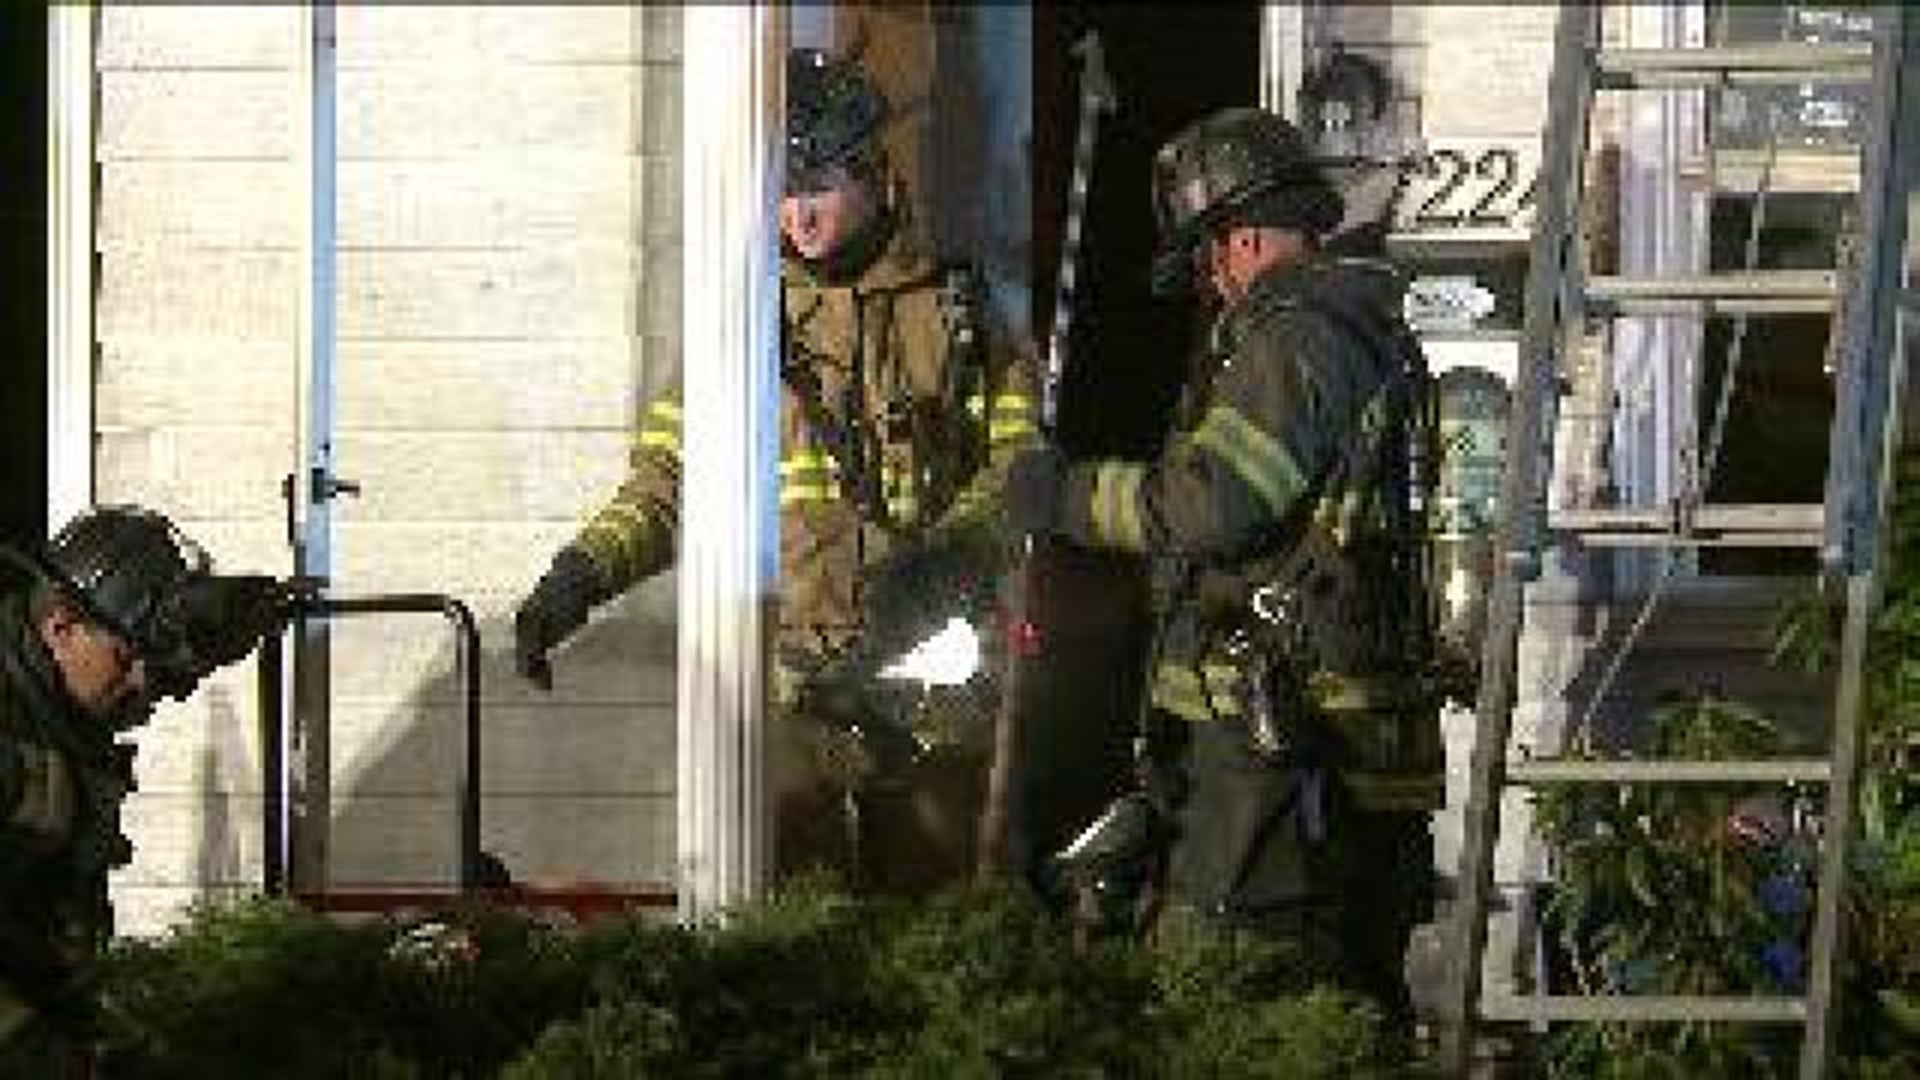 Flames Spark in Home, Alleged Arsonist in Custody